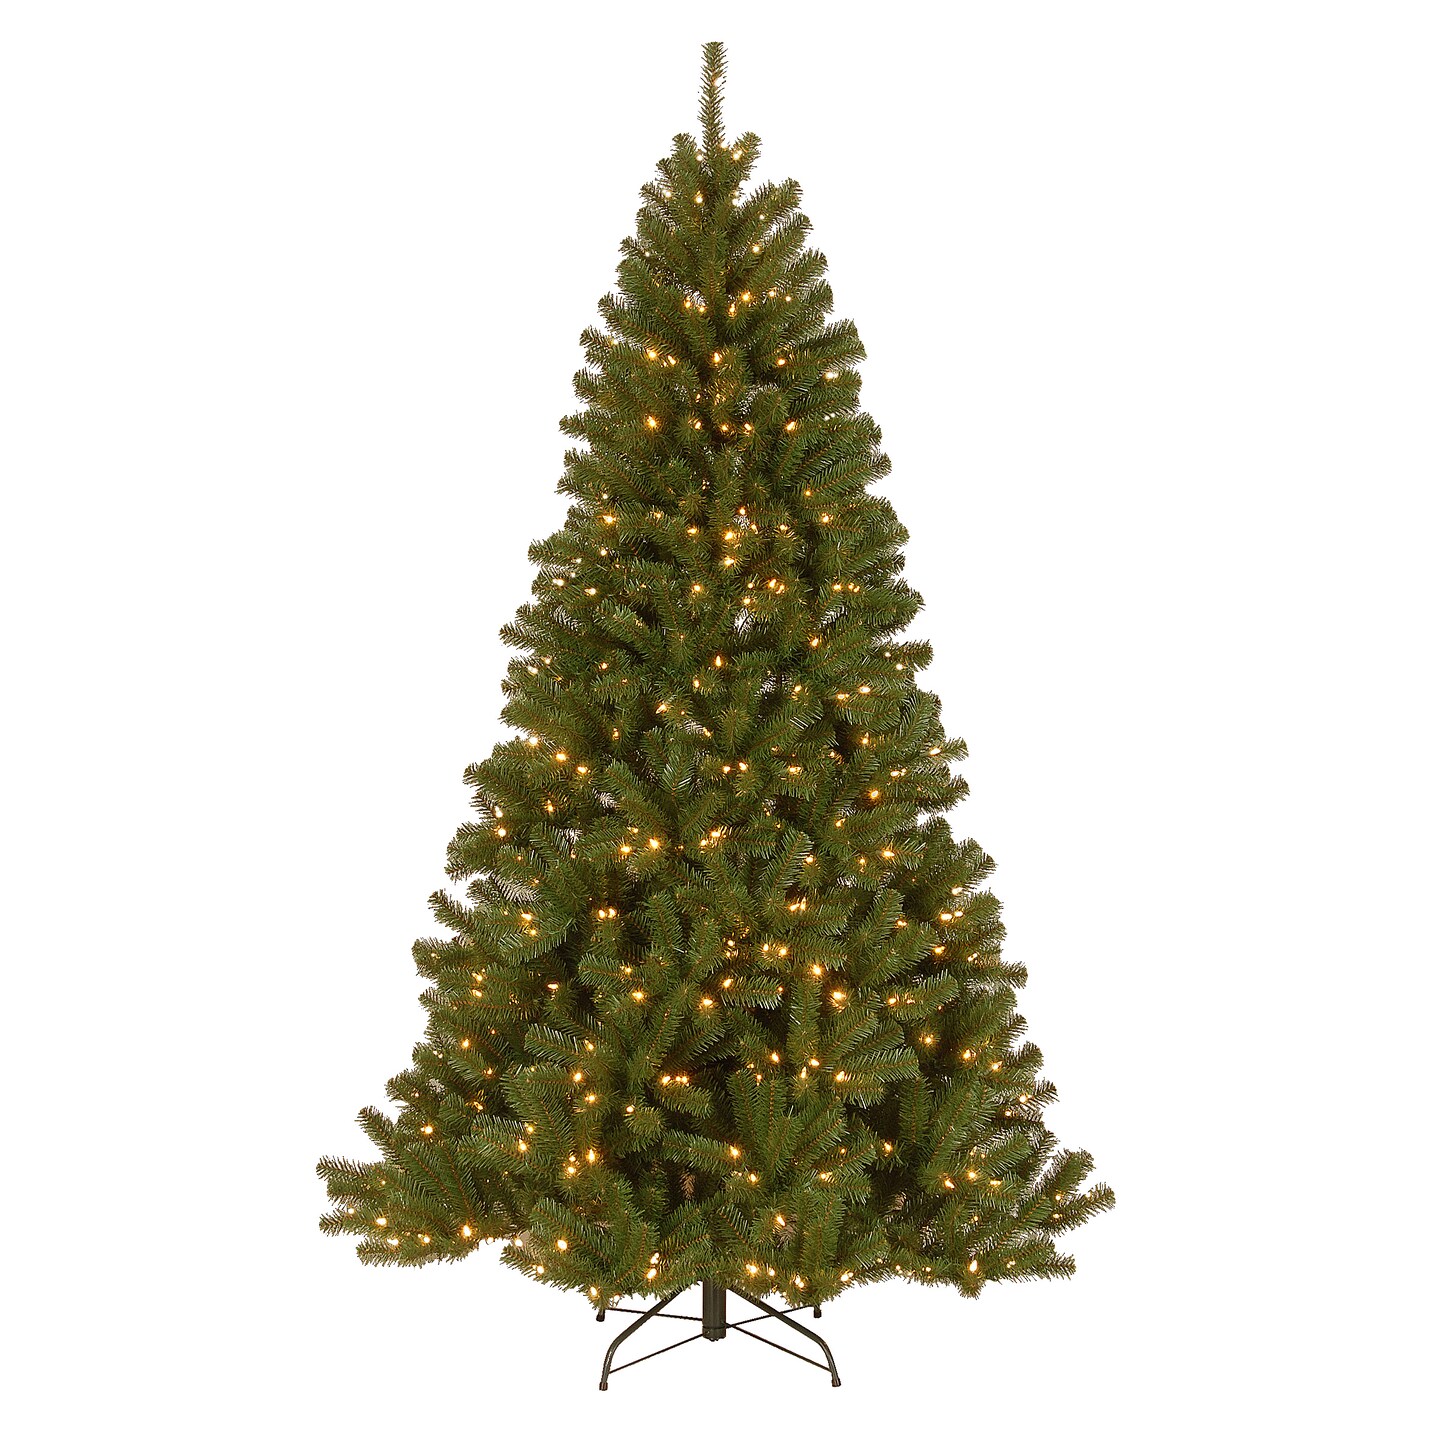 National Tree Company Pre-Lit Artificial Full Christmas Tree, Green, North Valley Spruce, White Lights, Includes Stand, 7.5 Feet